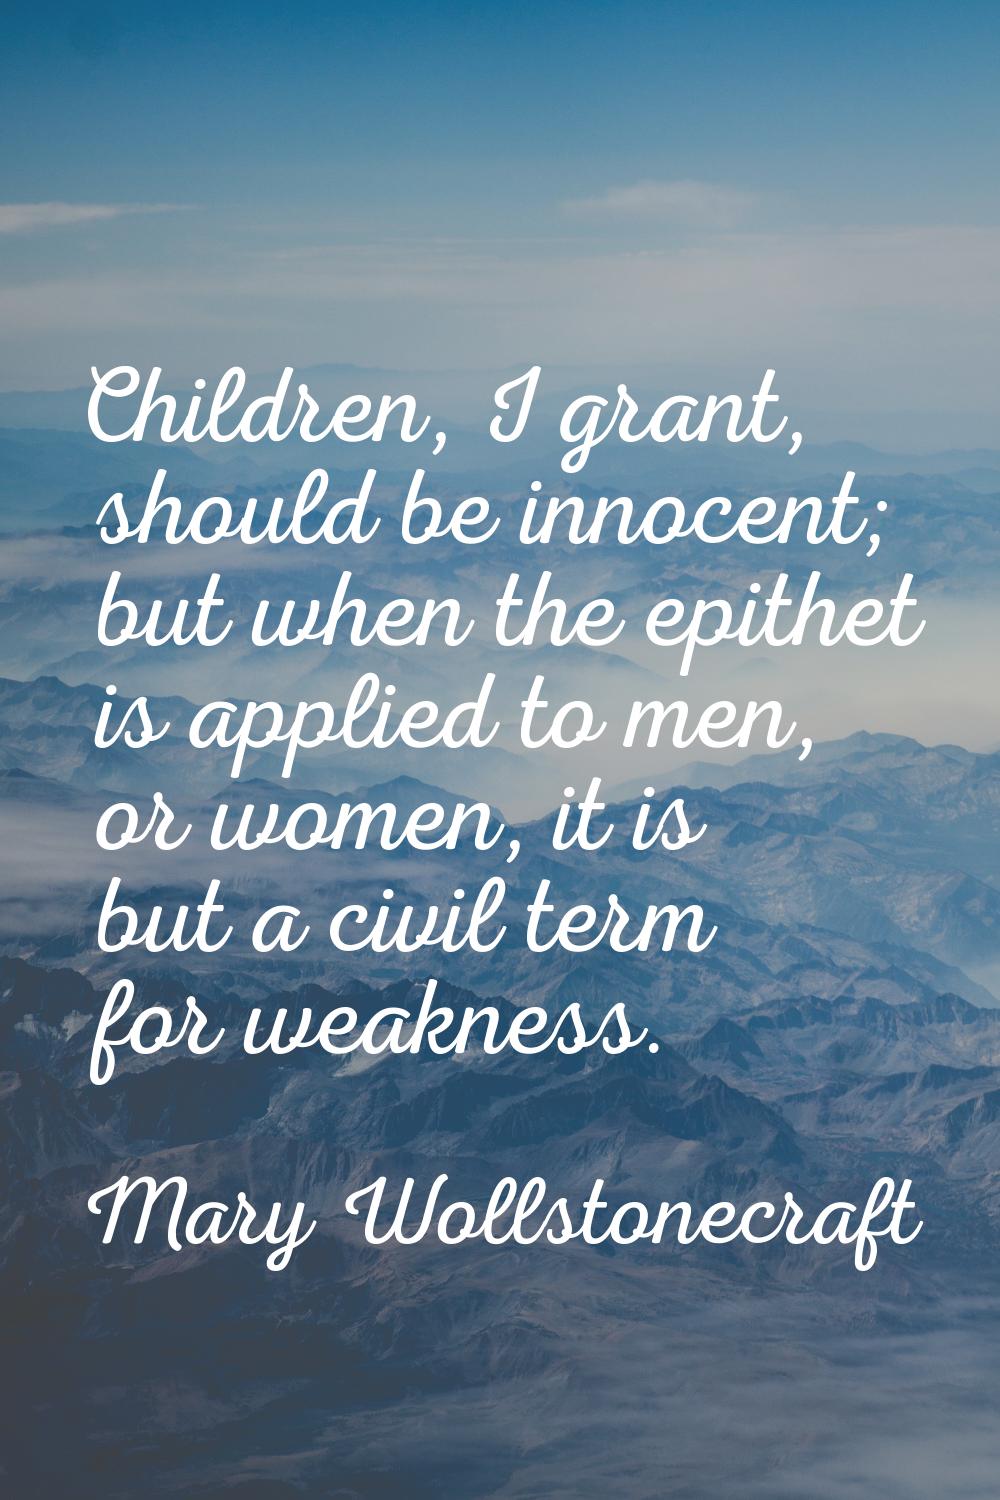 Children, I grant, should be innocent; but when the epithet is applied to men, or women, it is but 